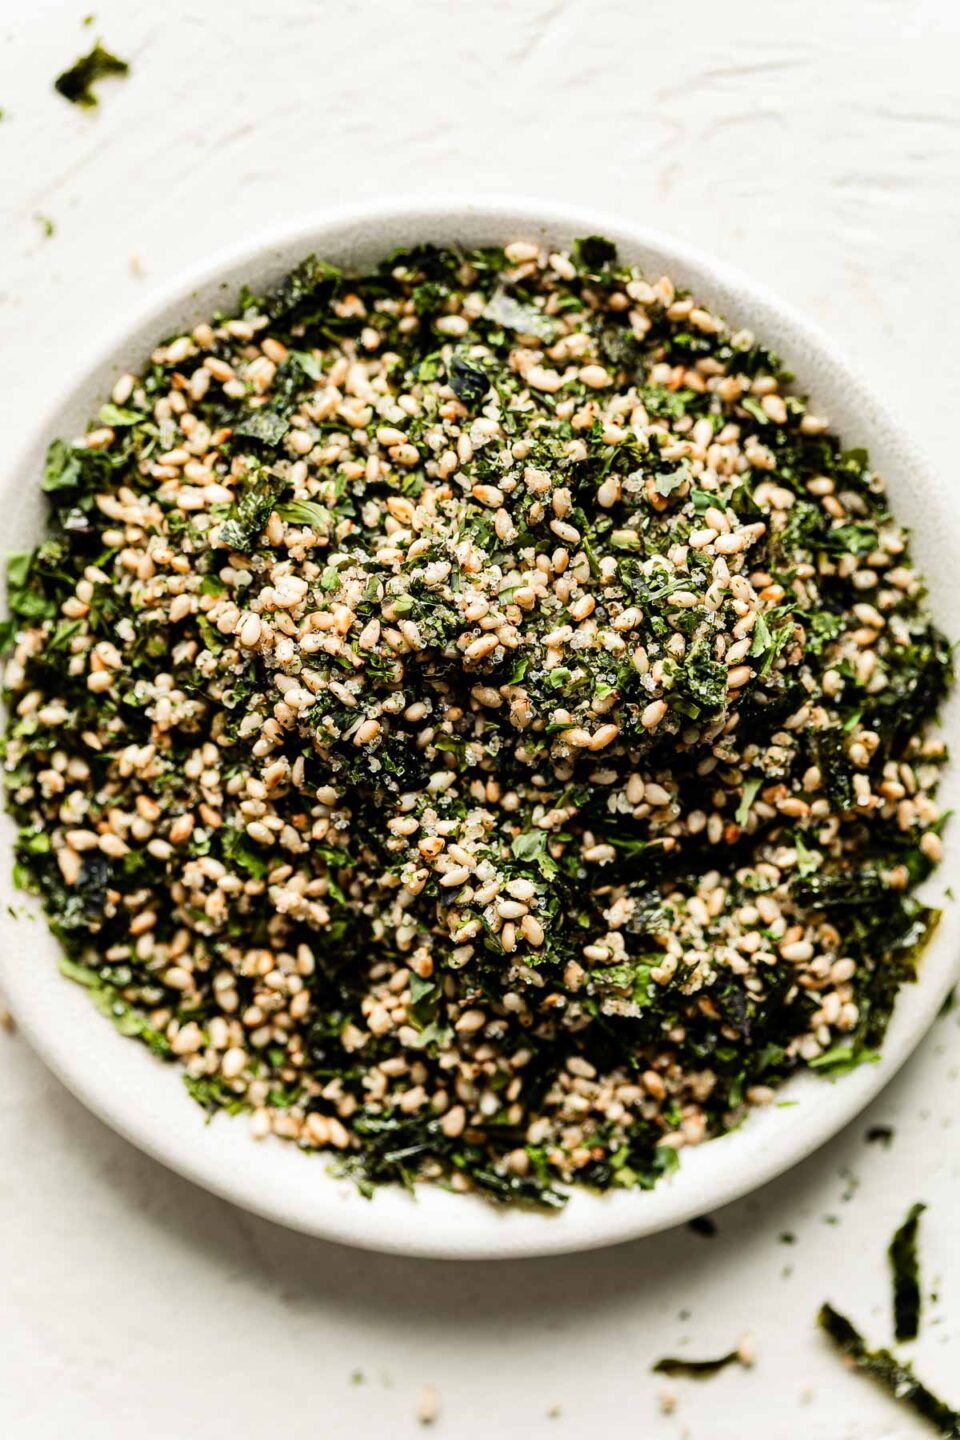 A close-up overhead shot of a bowl of furikake on a white textured surface.